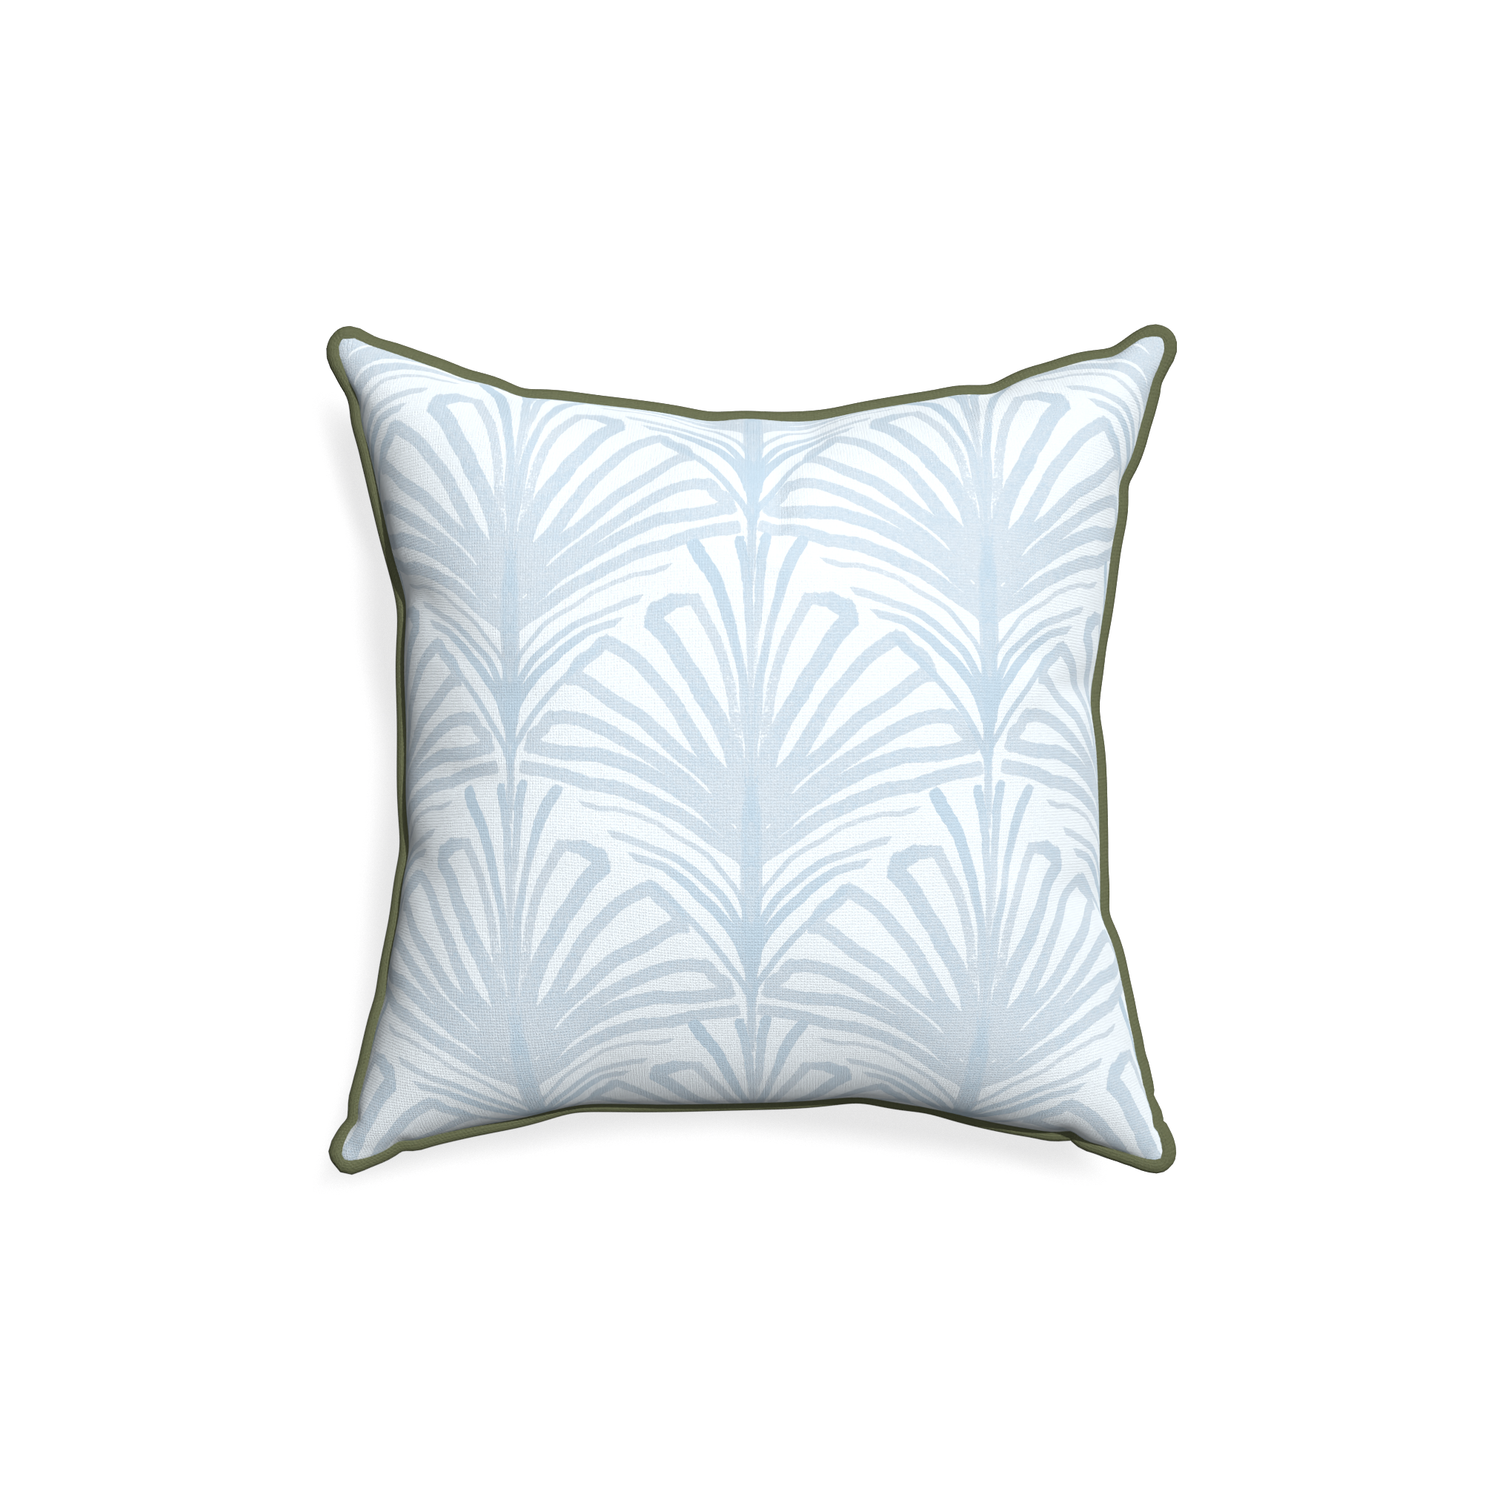 18-square suzy sky custom pillow with f piping on white background